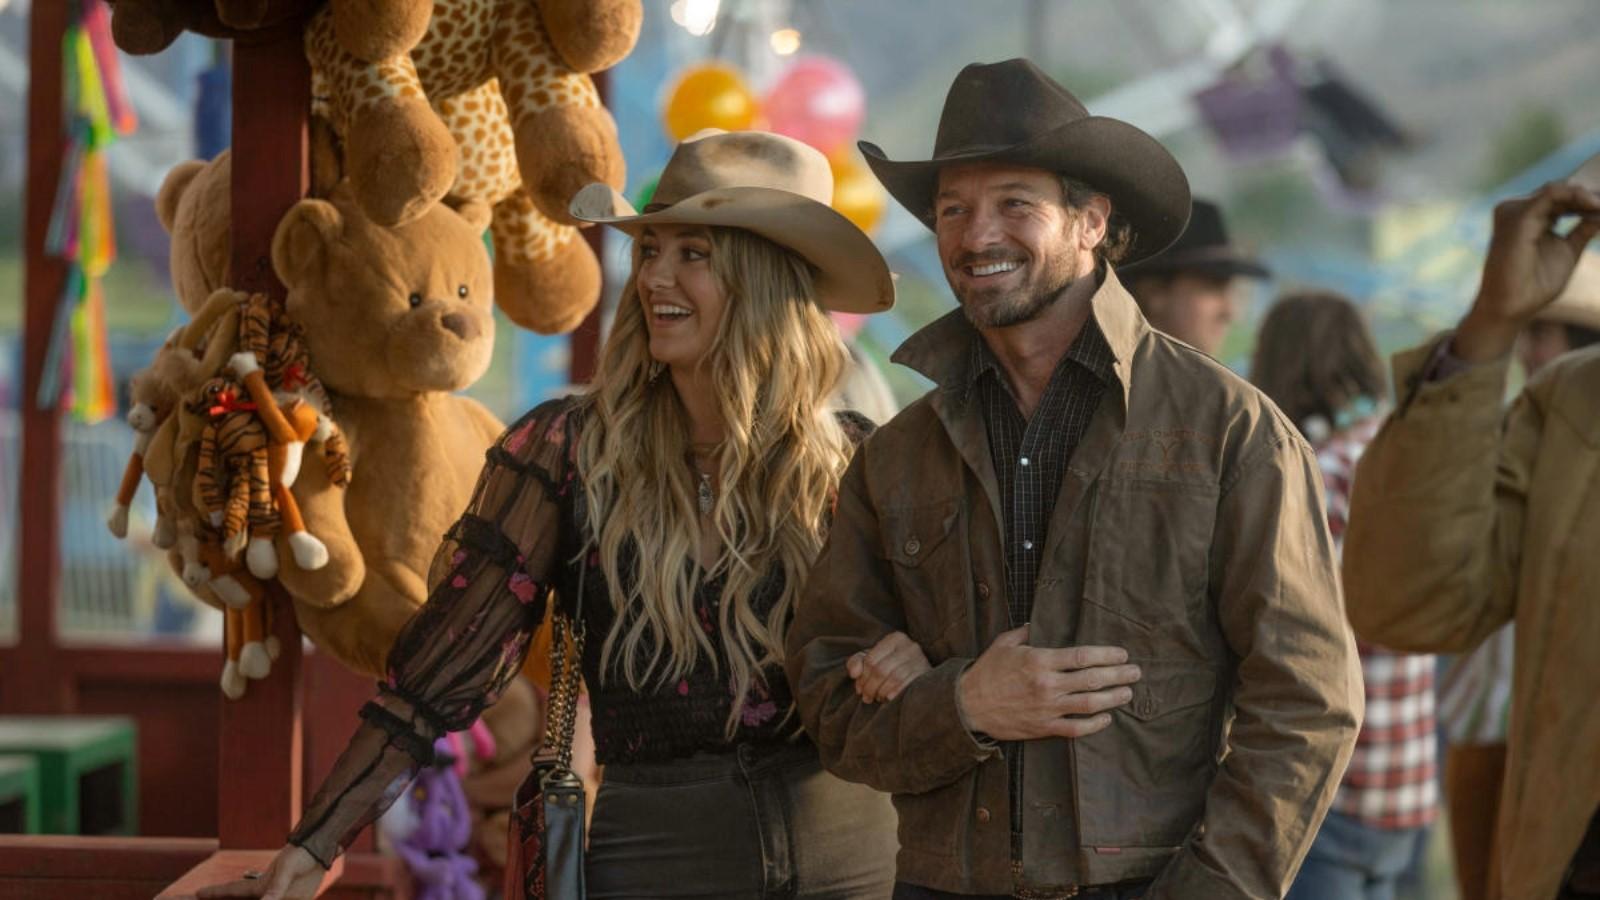 Lainey Wilson as Abby and Ian Bohen as Ryan in Yellowstone, walking through a carnival and holding arms